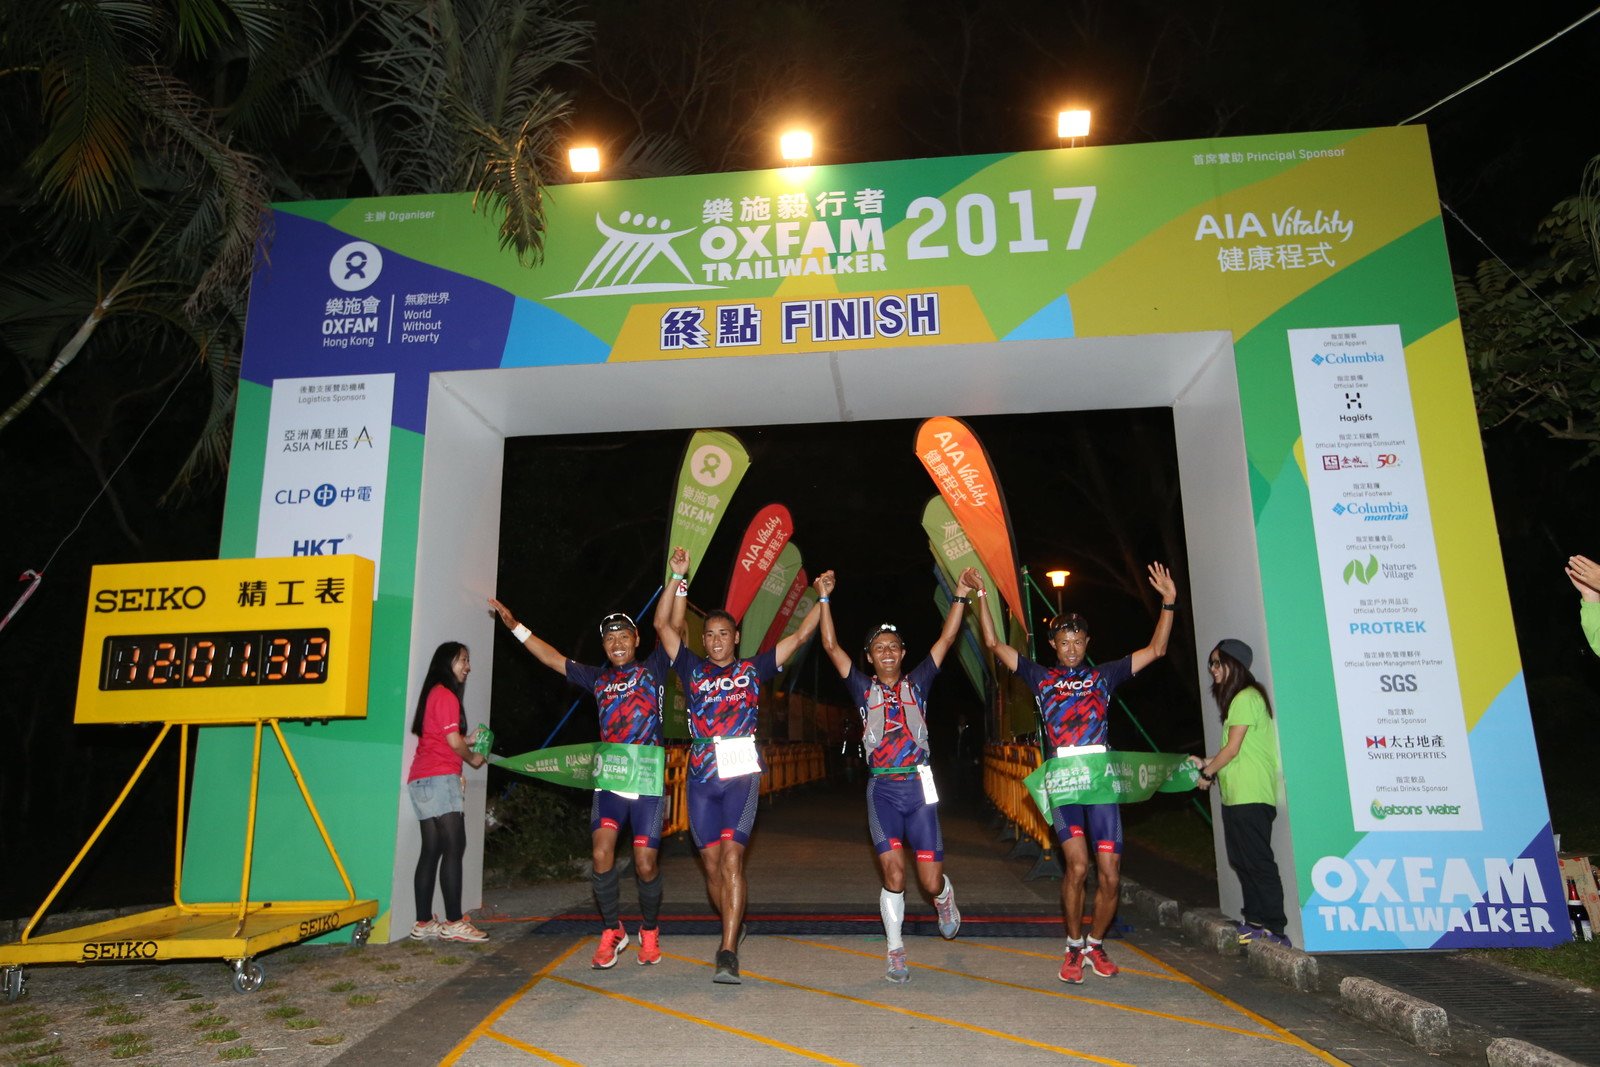 ‘AWOO Team Nepal’ finished Oxfam Trailwalker 2017 first in 12 hours 01 minute